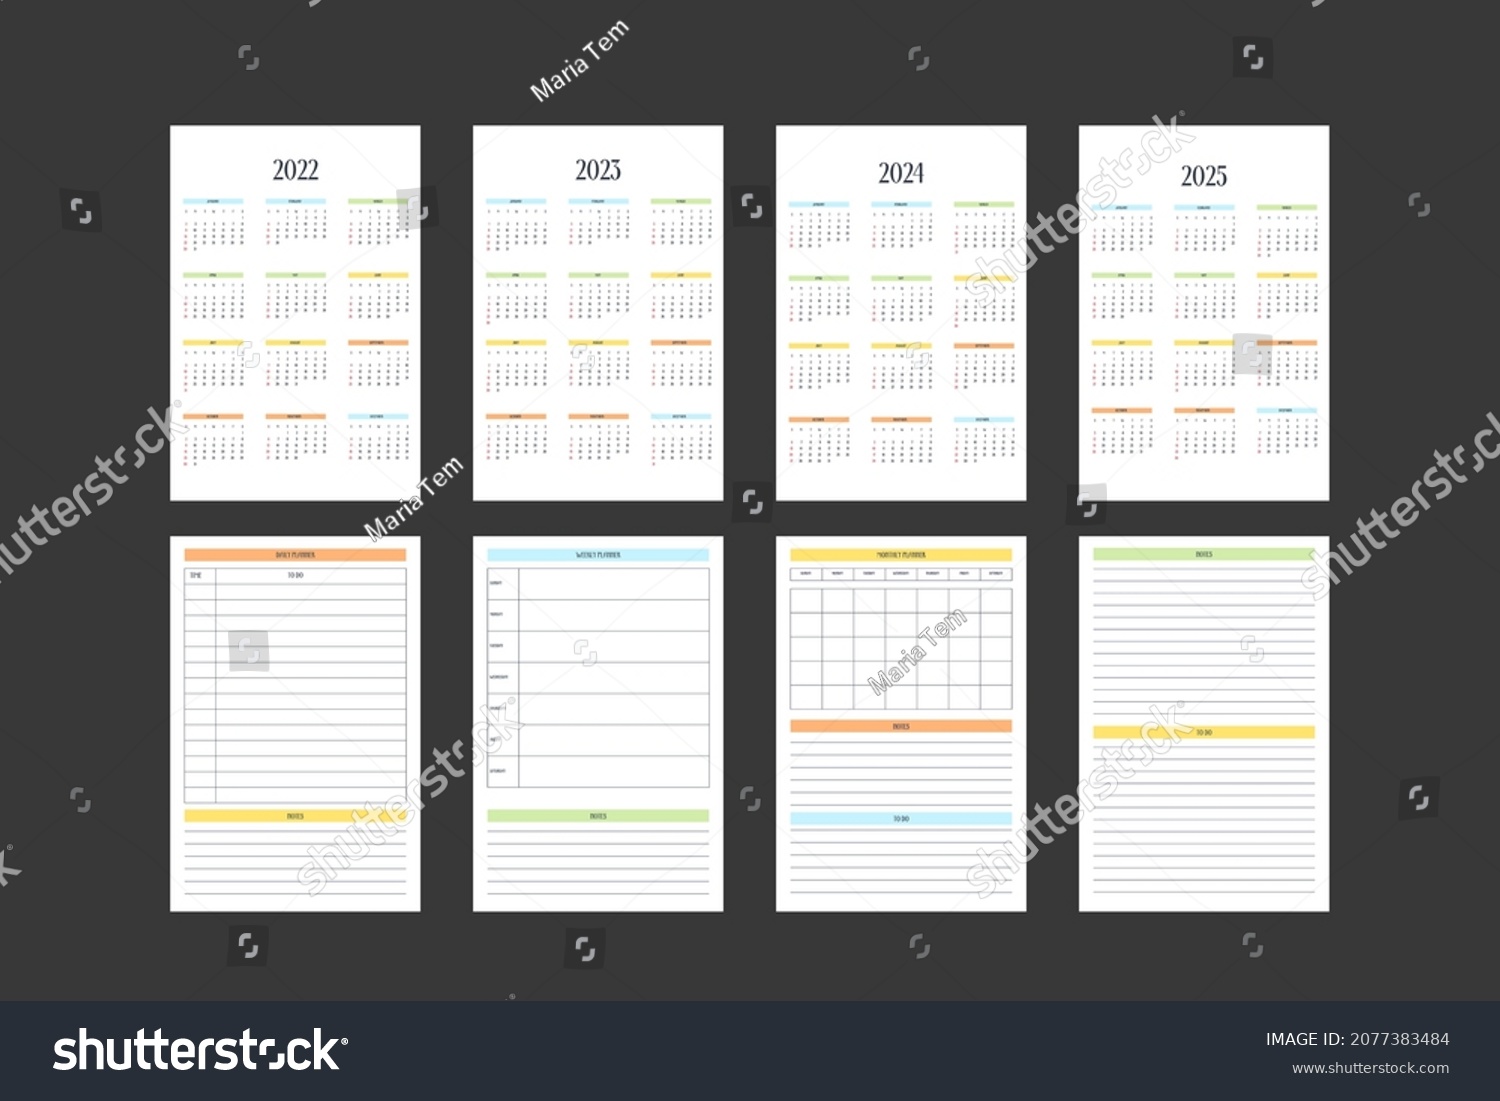 2022 2023 2024 2025 calendar and daily weekly - Royalty Free Stock ...